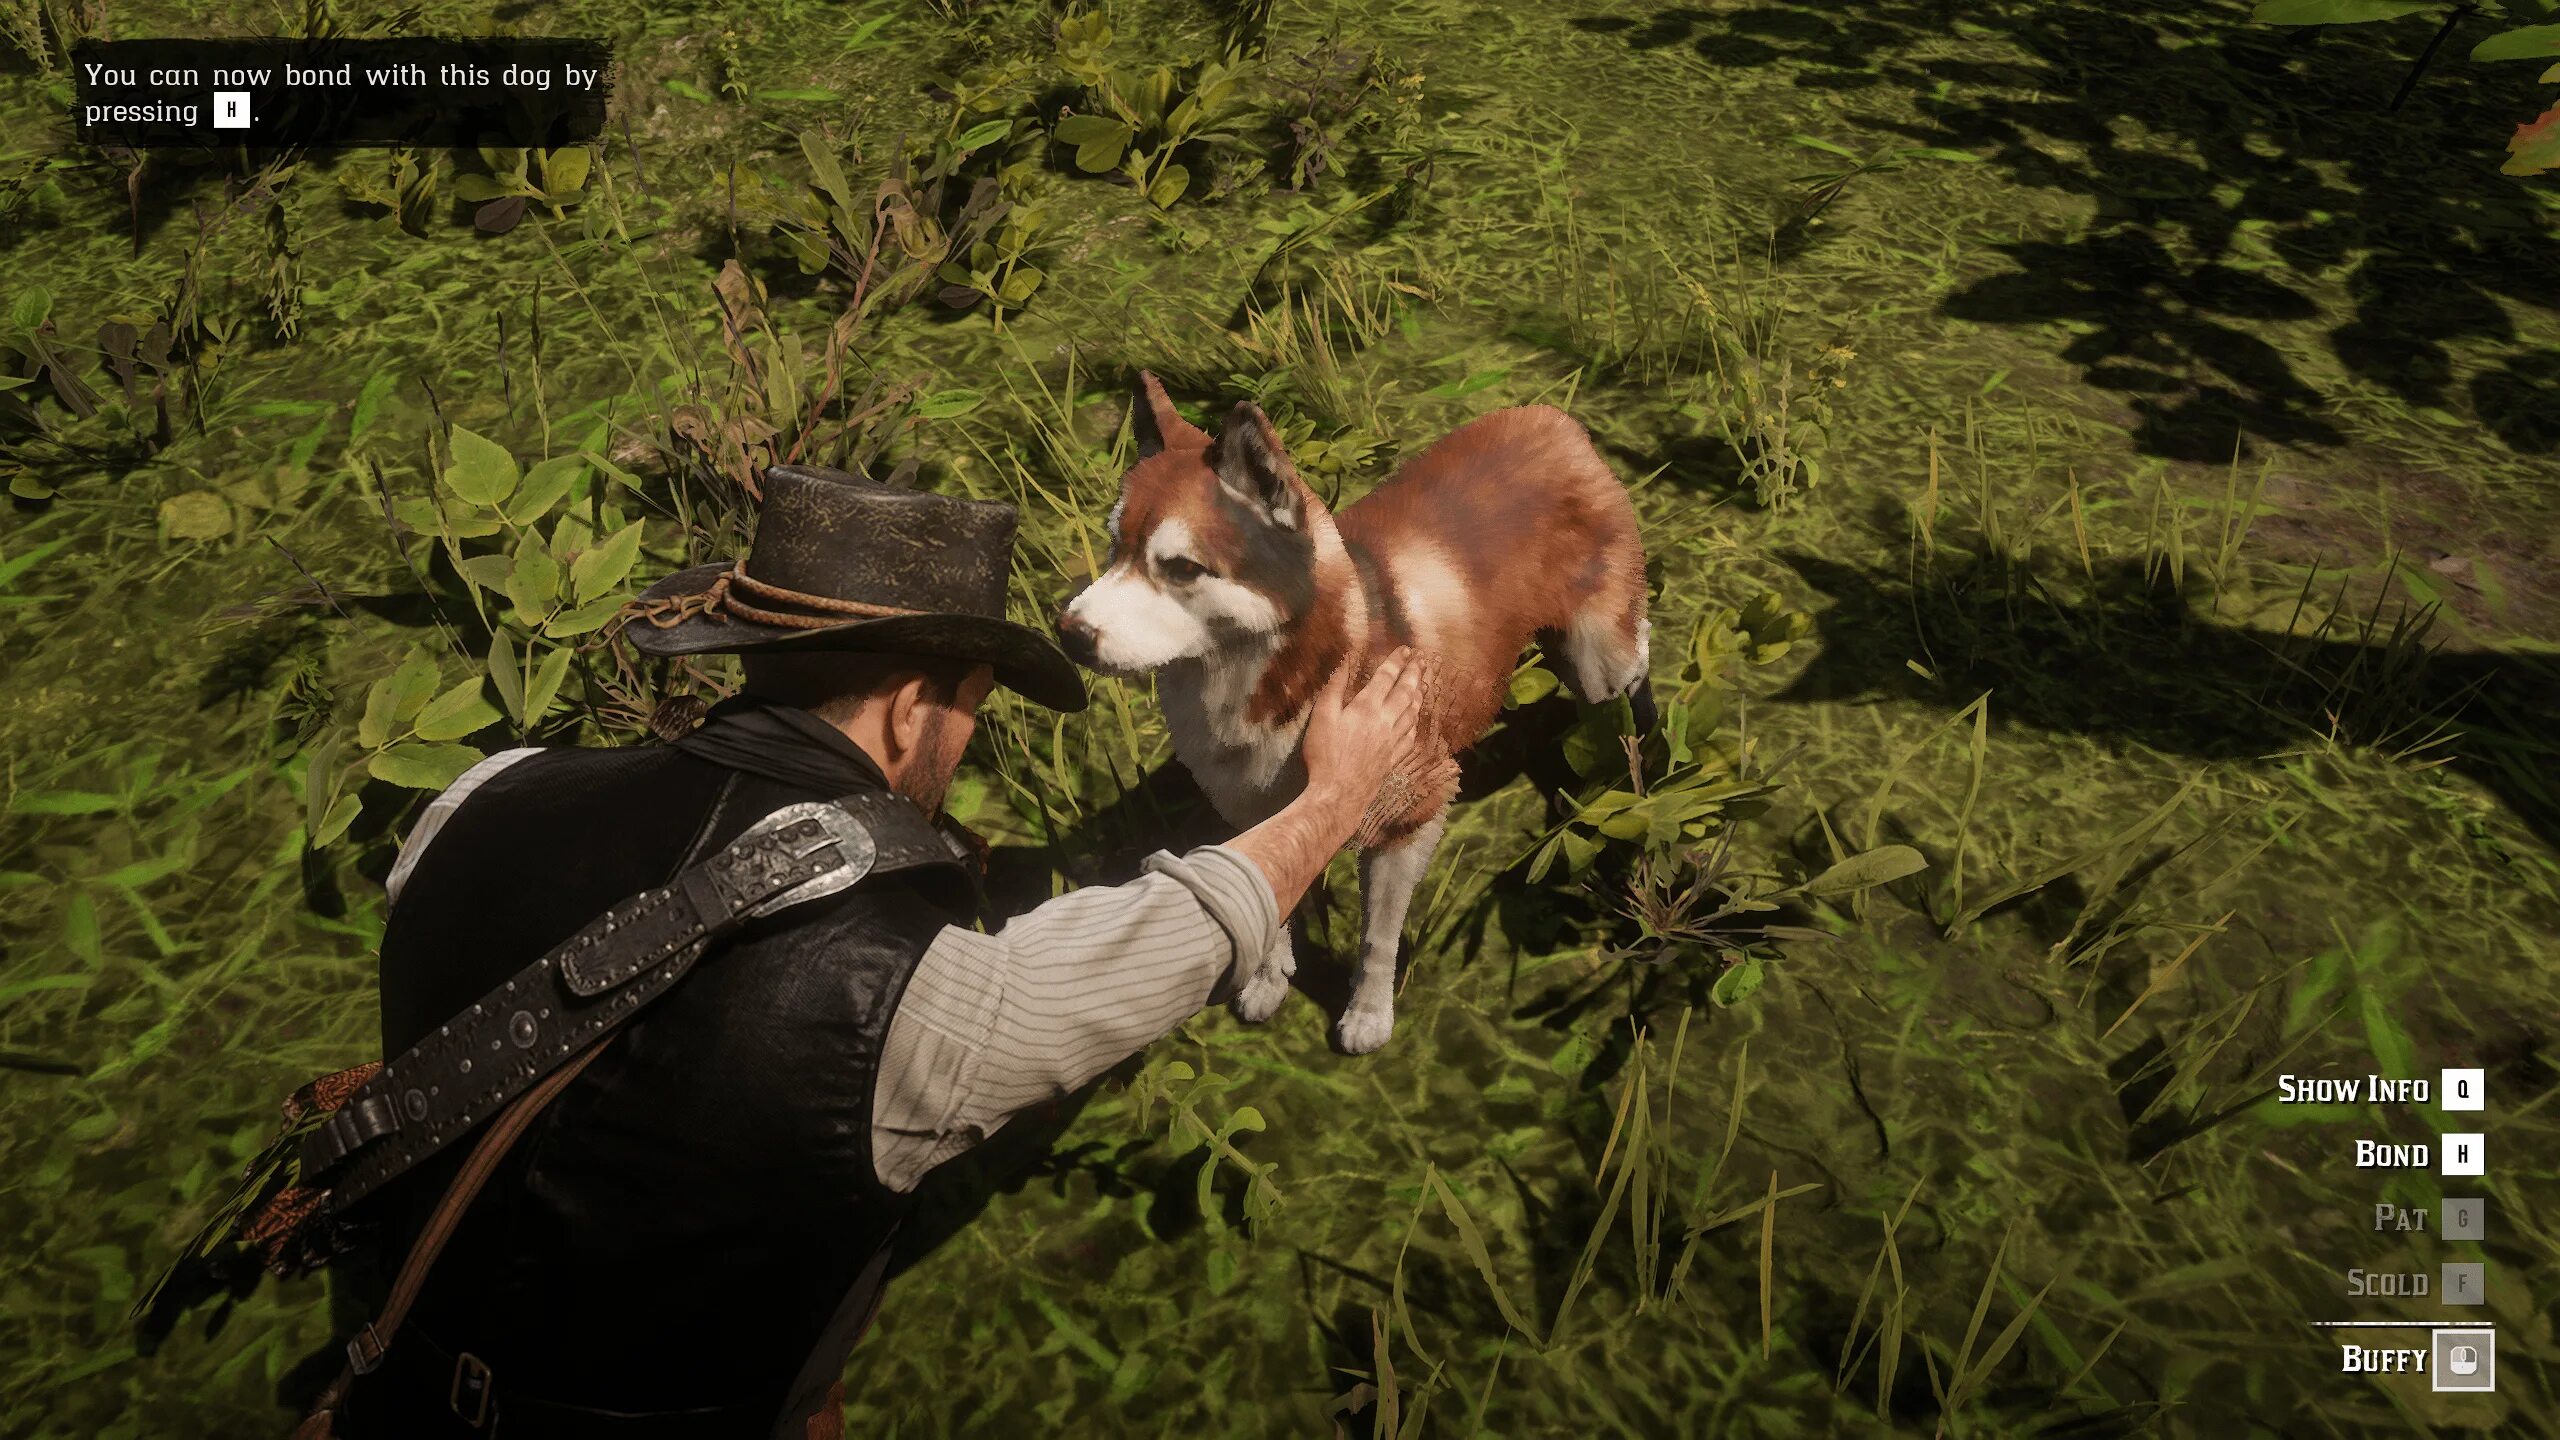 Red Dead Redemption 2 Dog. Red Dead Redemption 2 собаки. Red Dead Redemption 2 Companion. РДР мод на собаку. Рдр 2 собаки